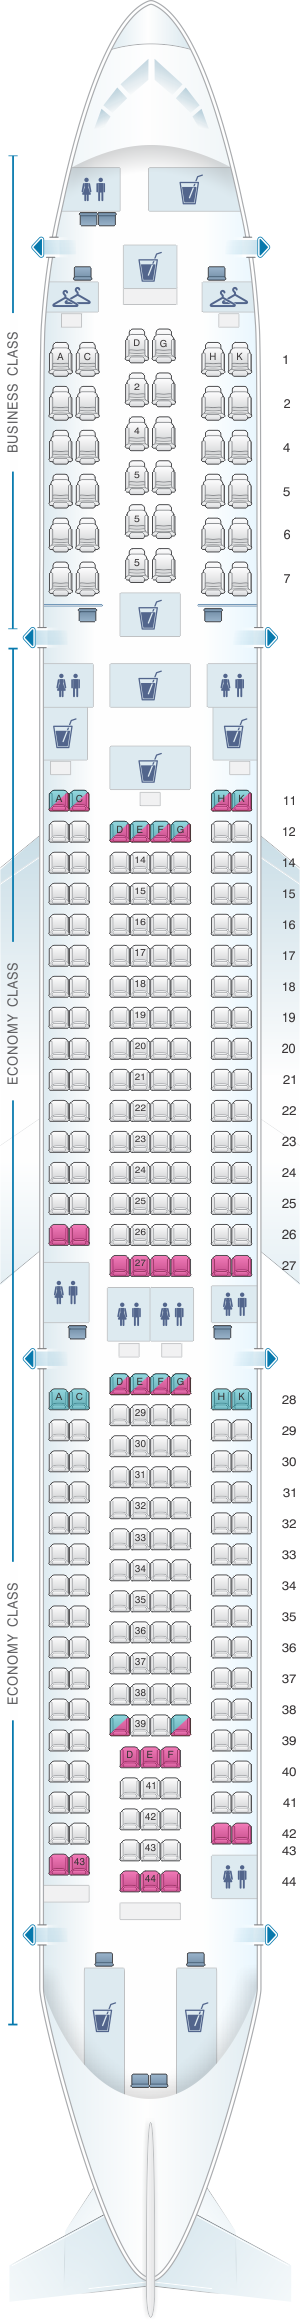 airbus a330-300 seat map